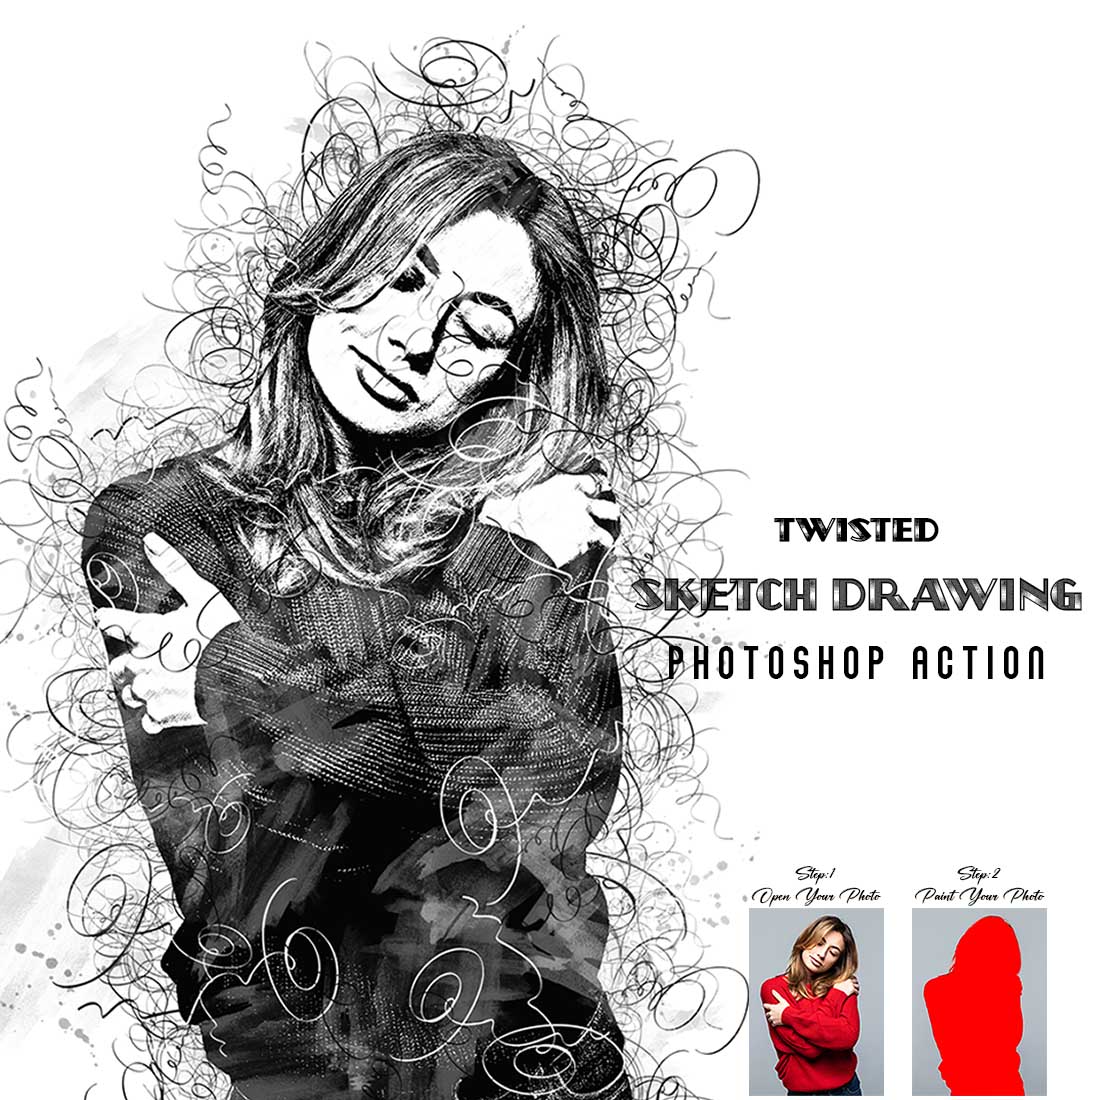 Twisted Sketch Drawing Photoshop Action cover image.